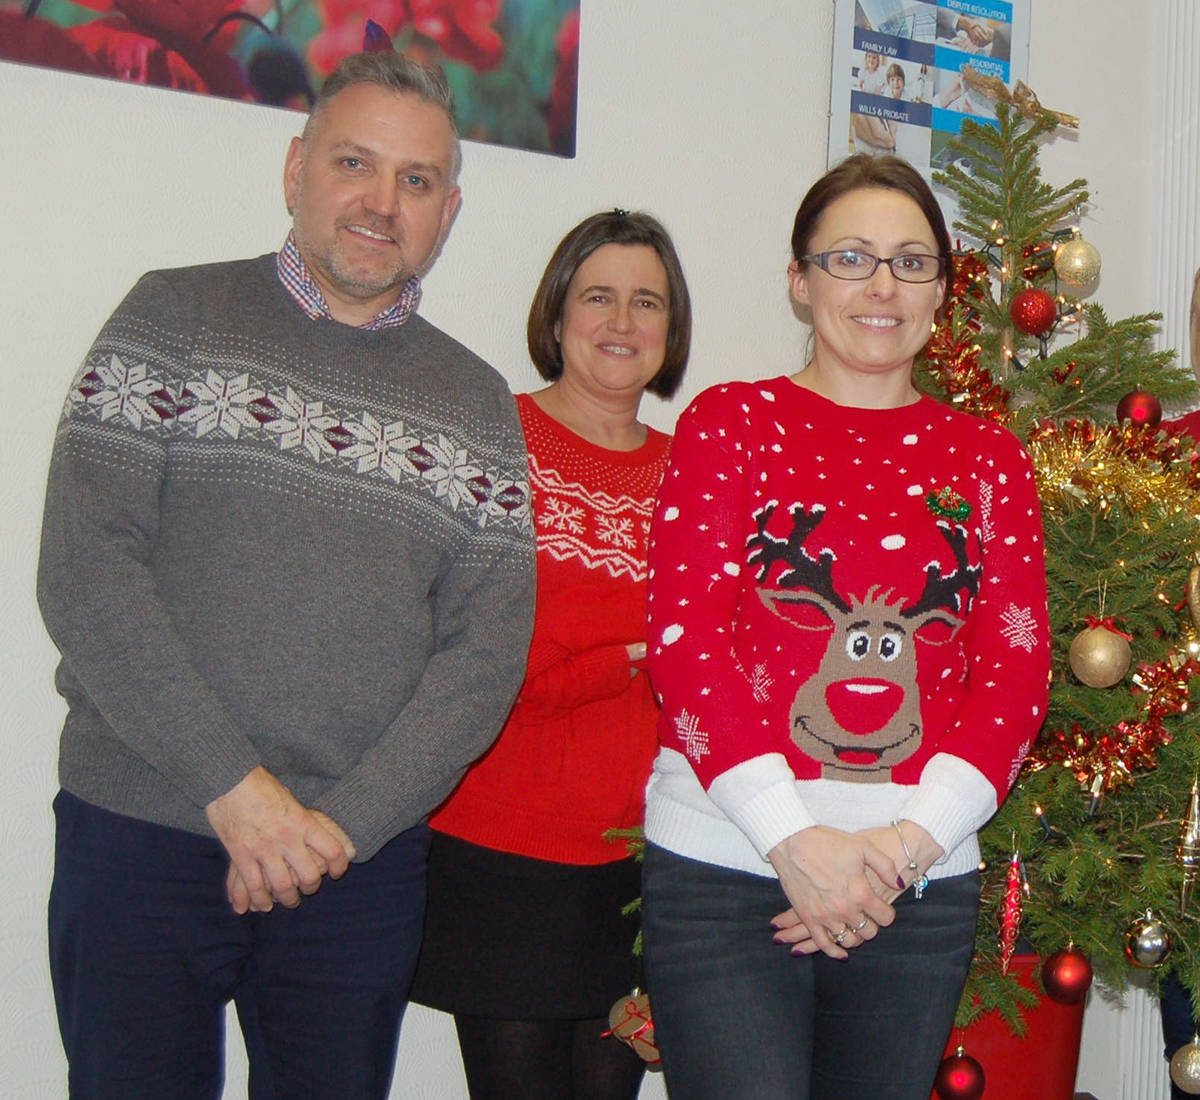 The Donna Louise Christmas Jumper Day